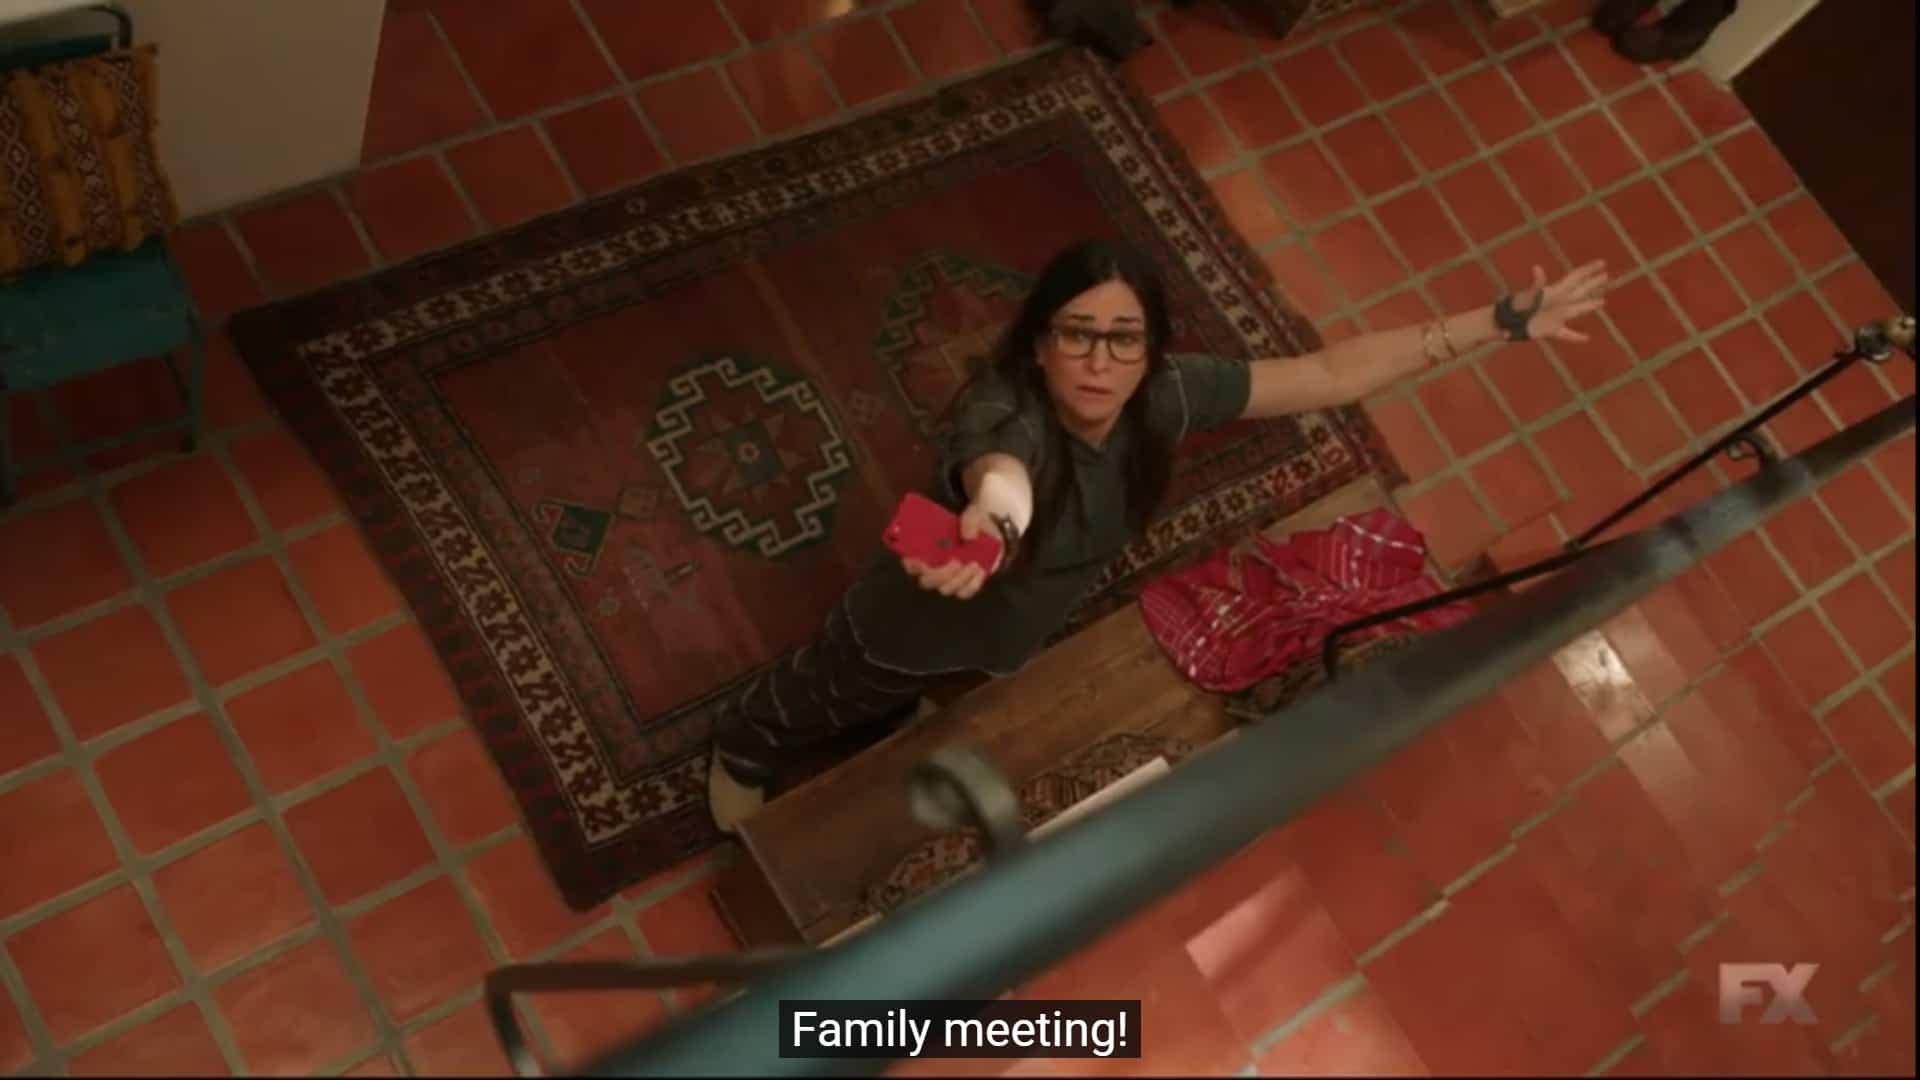 Better Things: Season 5/ Episode 7 “Family Meeting” – Recap/ Review (with Spoilers)